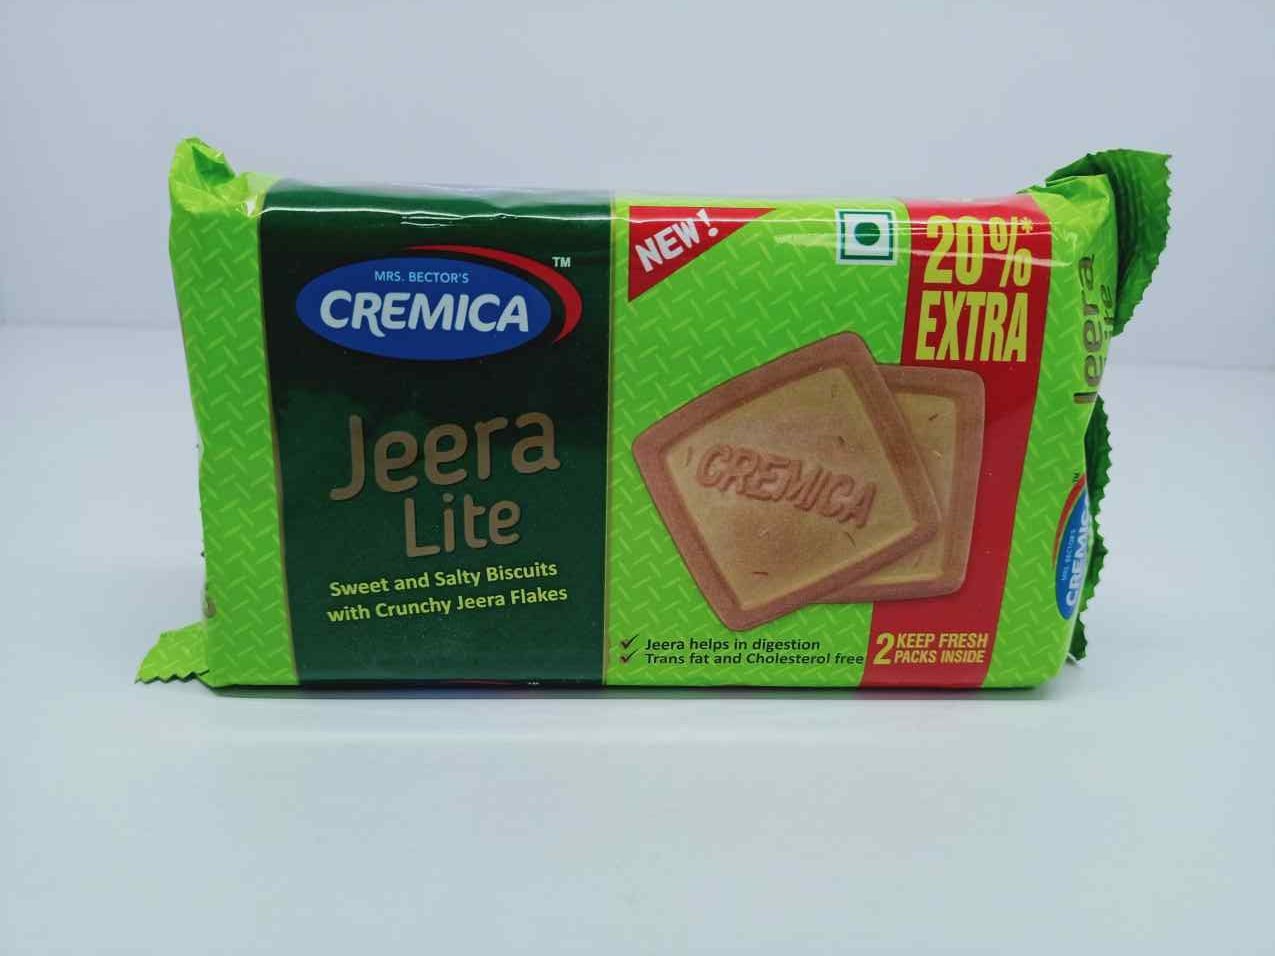 Cremica jeera lite sweet and biscuit with crunchy jeera flakes biscuits, 180 grams